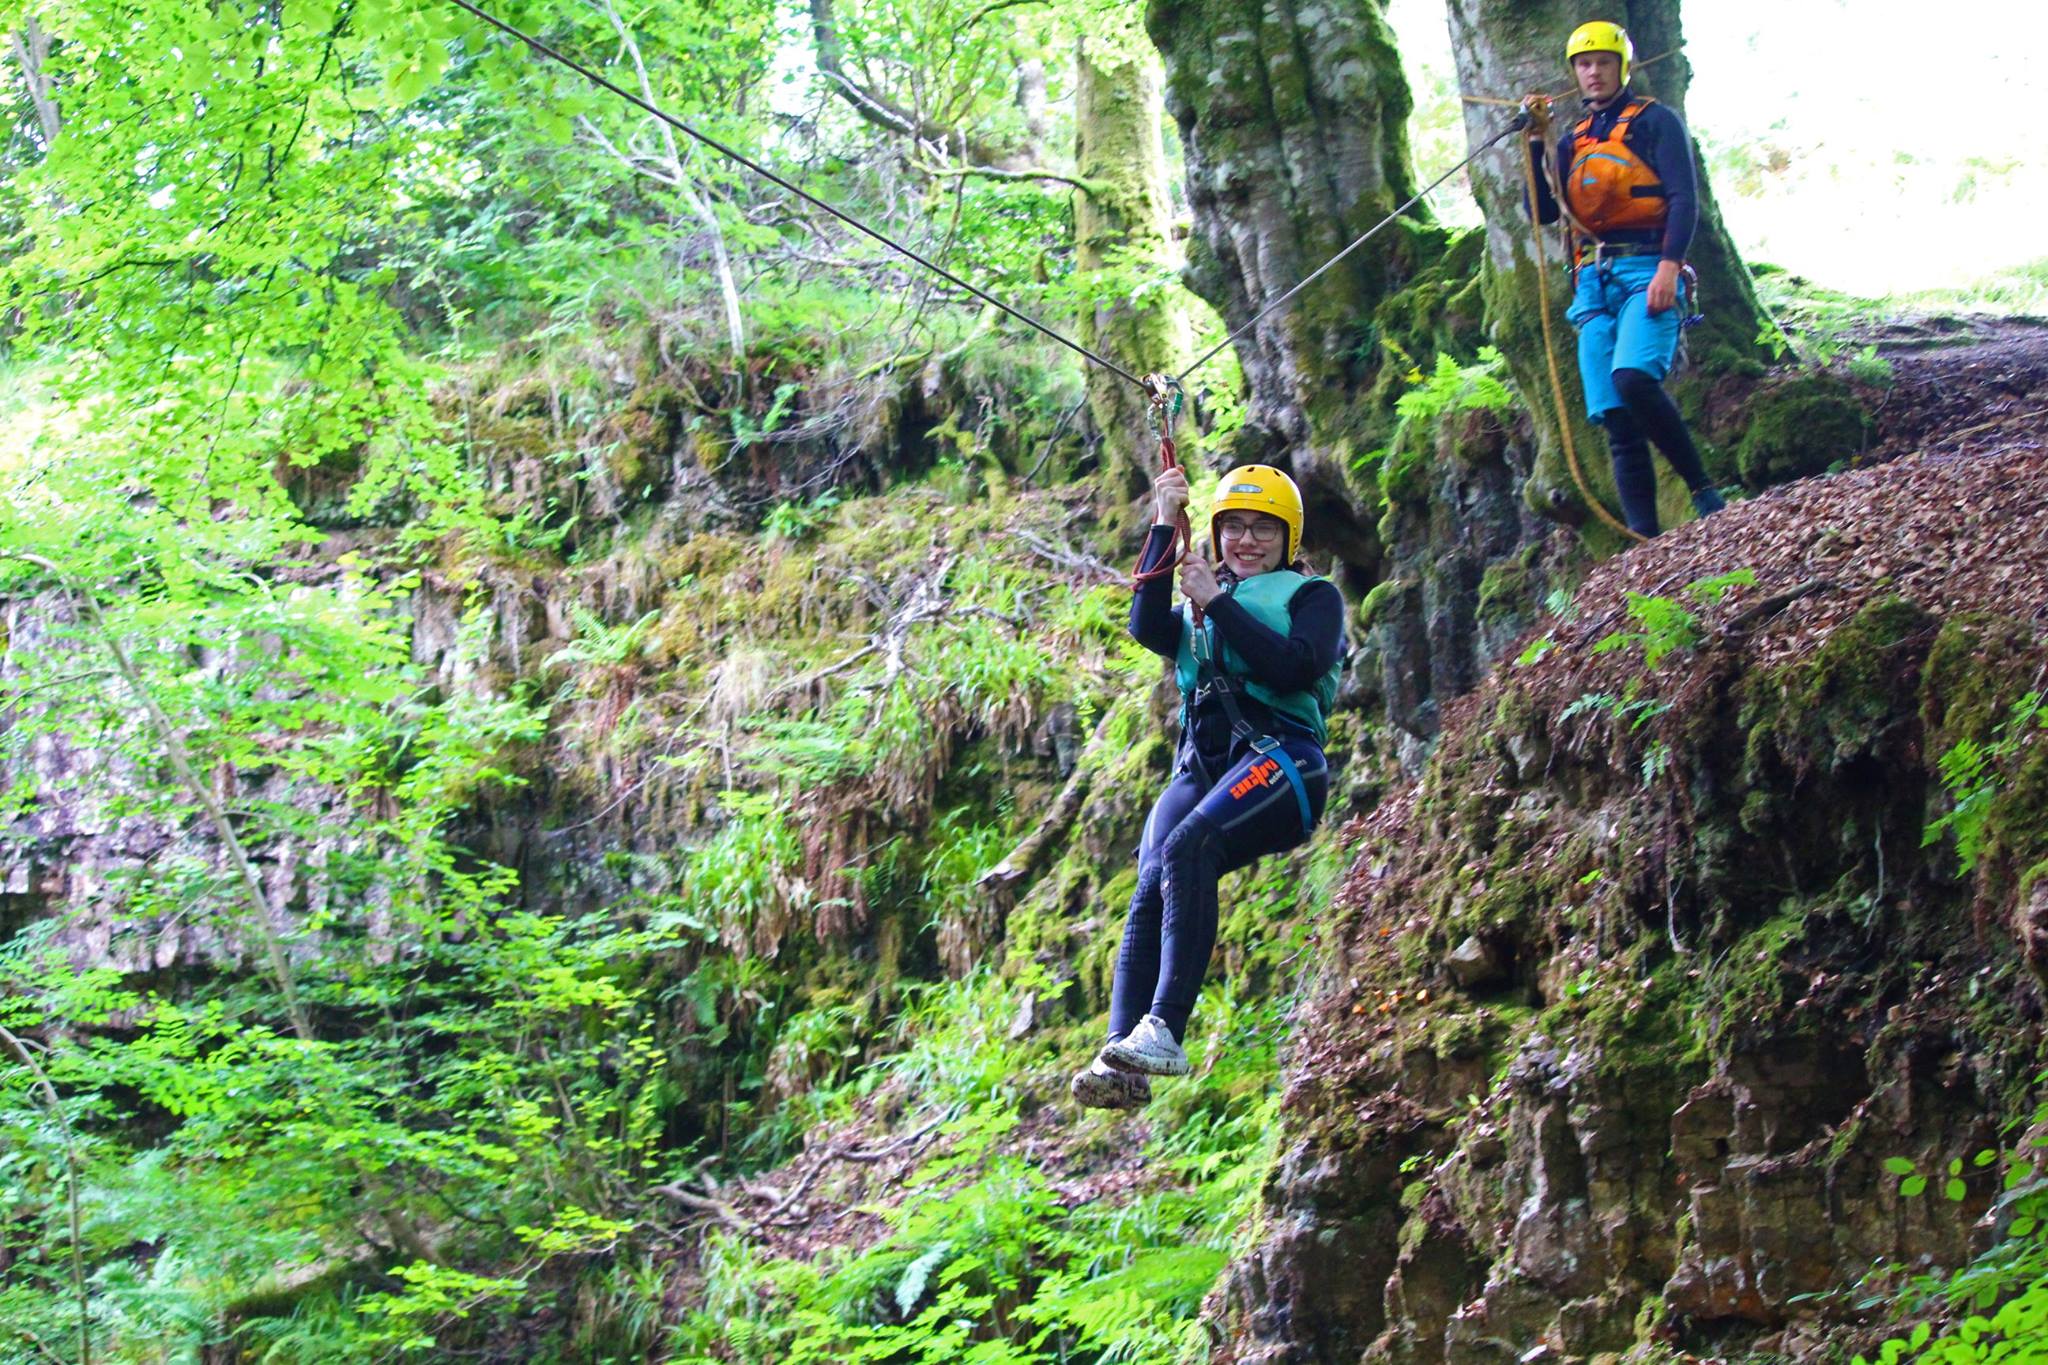 Gorge Scrambling in Ayrshire | Abseil & Zipline | Things to do is Ayrshire!